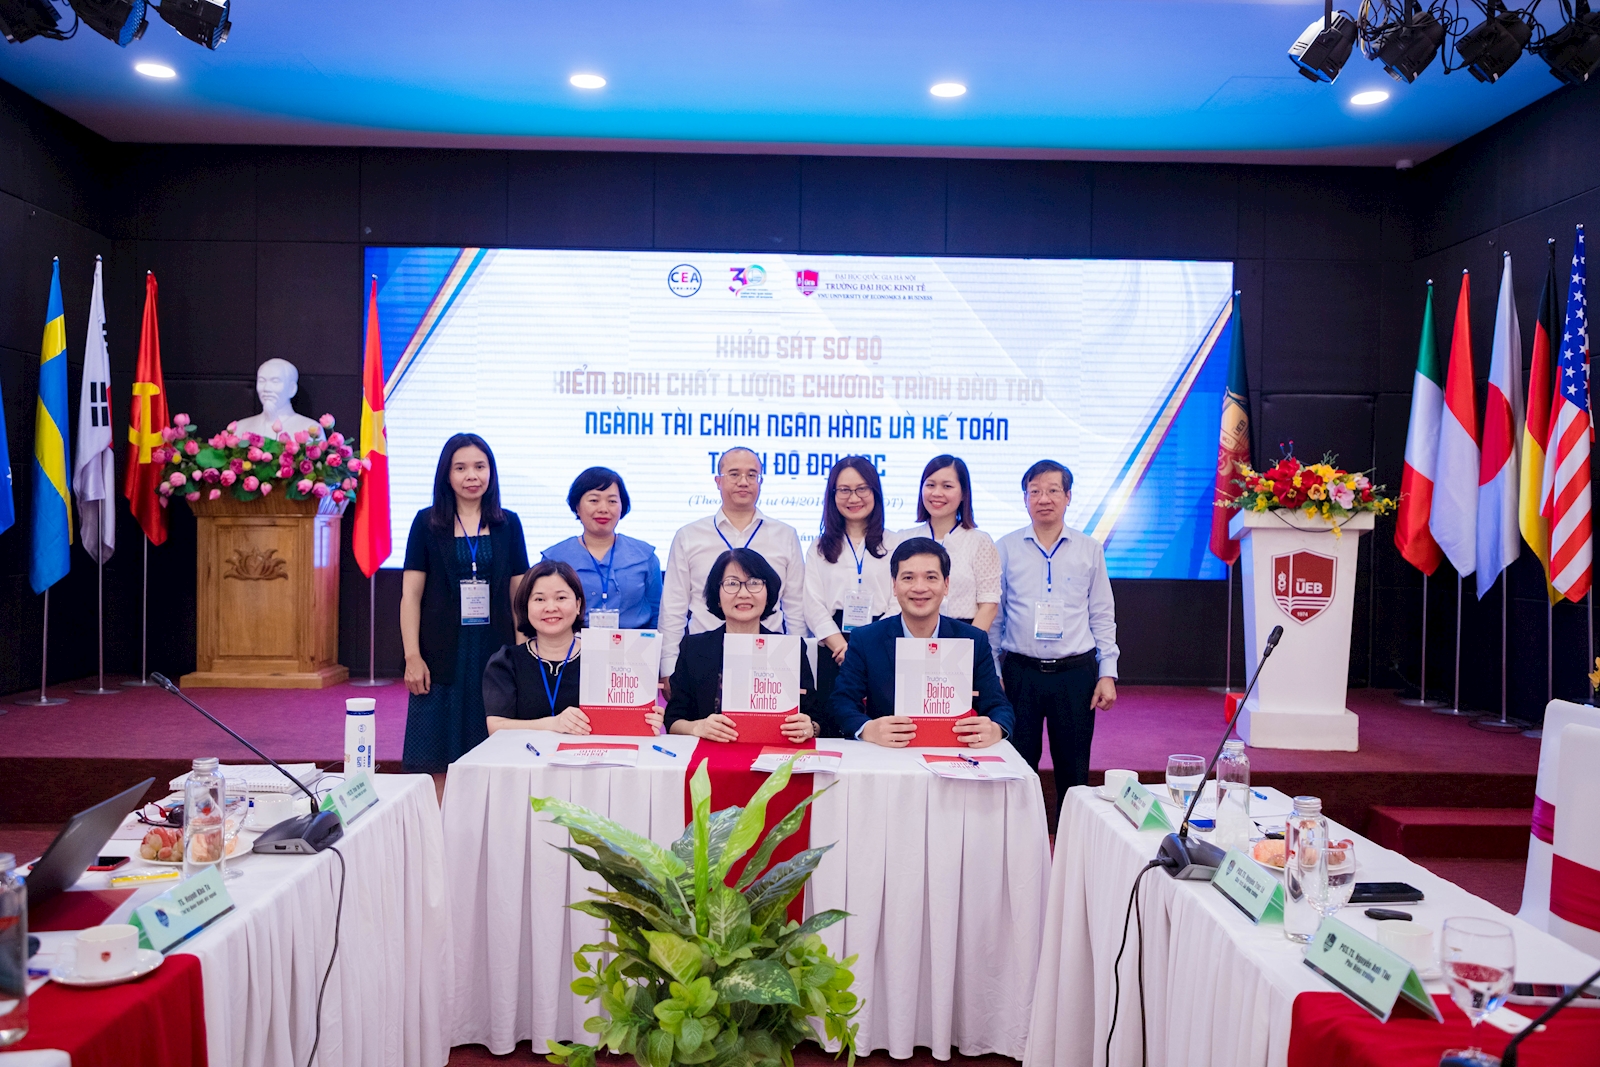 UEB - the first university in Vietnam to have 2 training programs achieving 100% criterion as set by the Ministry of Education and Training